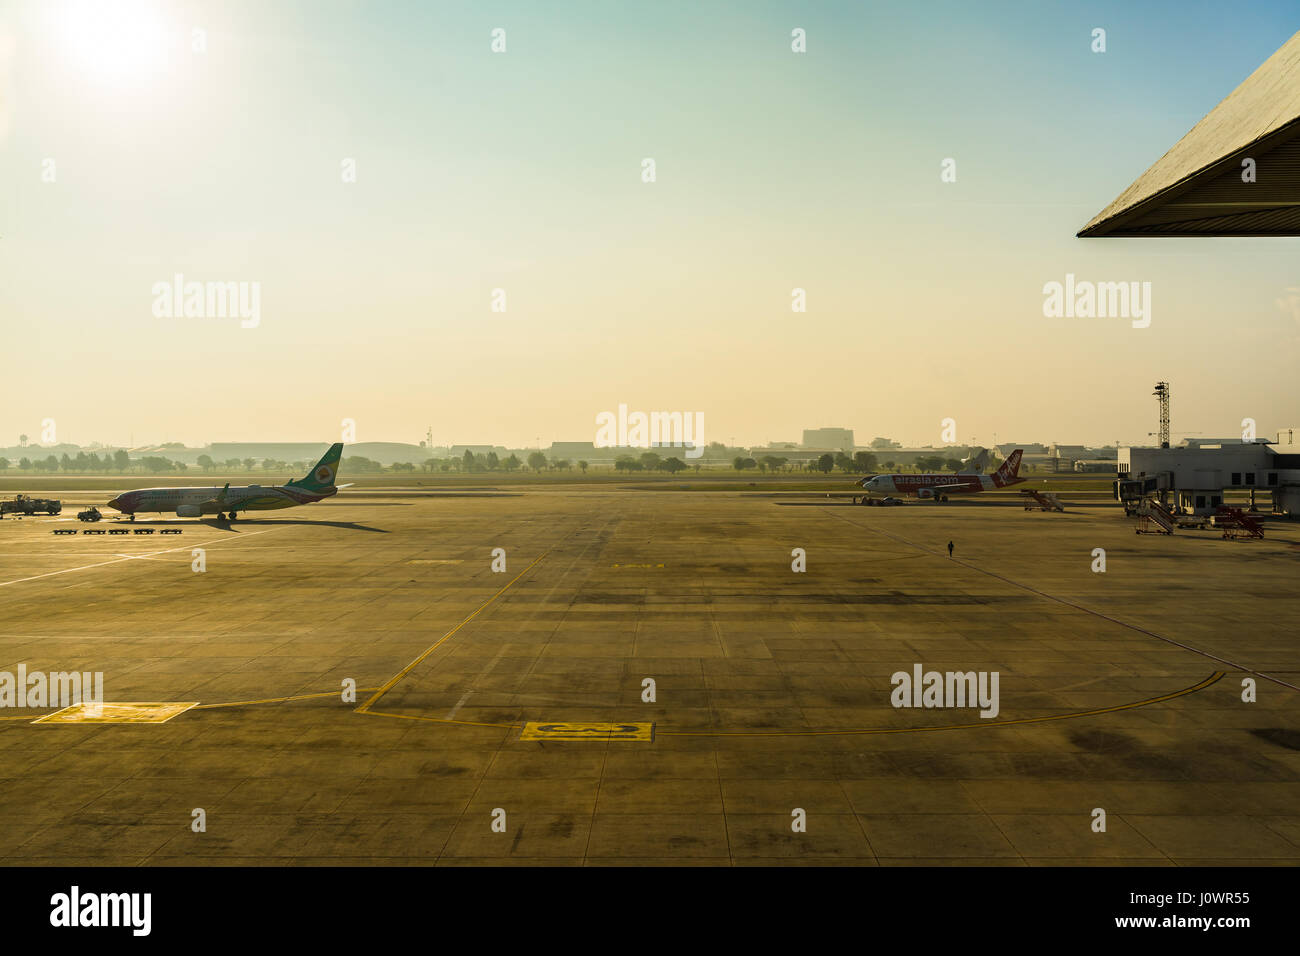 Bangkok, Thailand - March 19, 2017: Don Muang International Airport. Parking Airplanes at airport during boarding operations. They are few planes on a Stock Photo